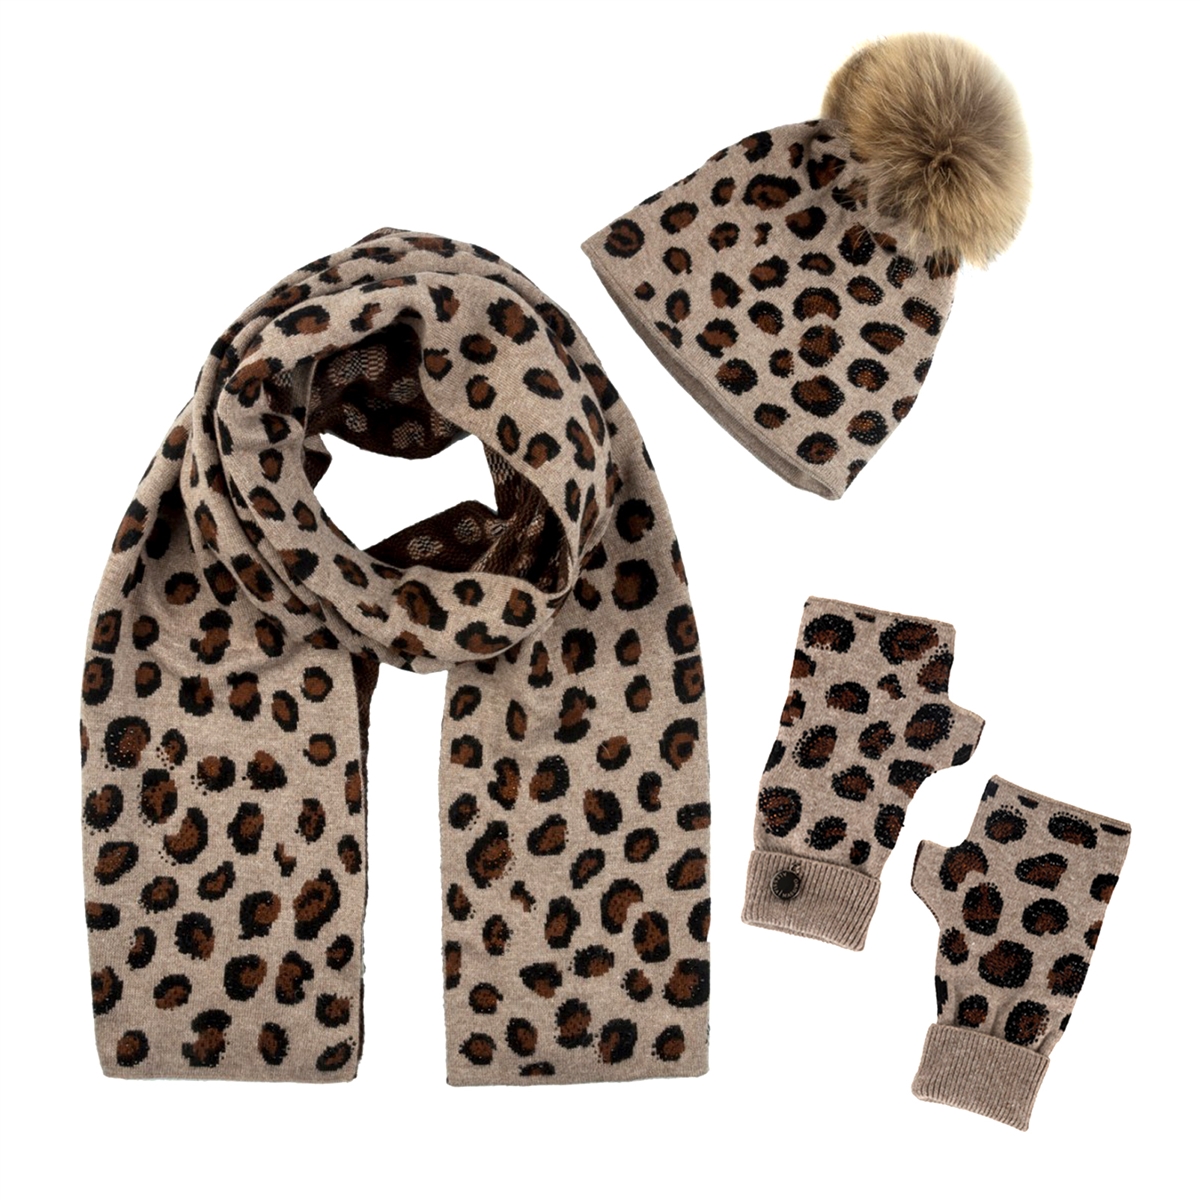 2 Piece Scarf And Glove Set, Scarves